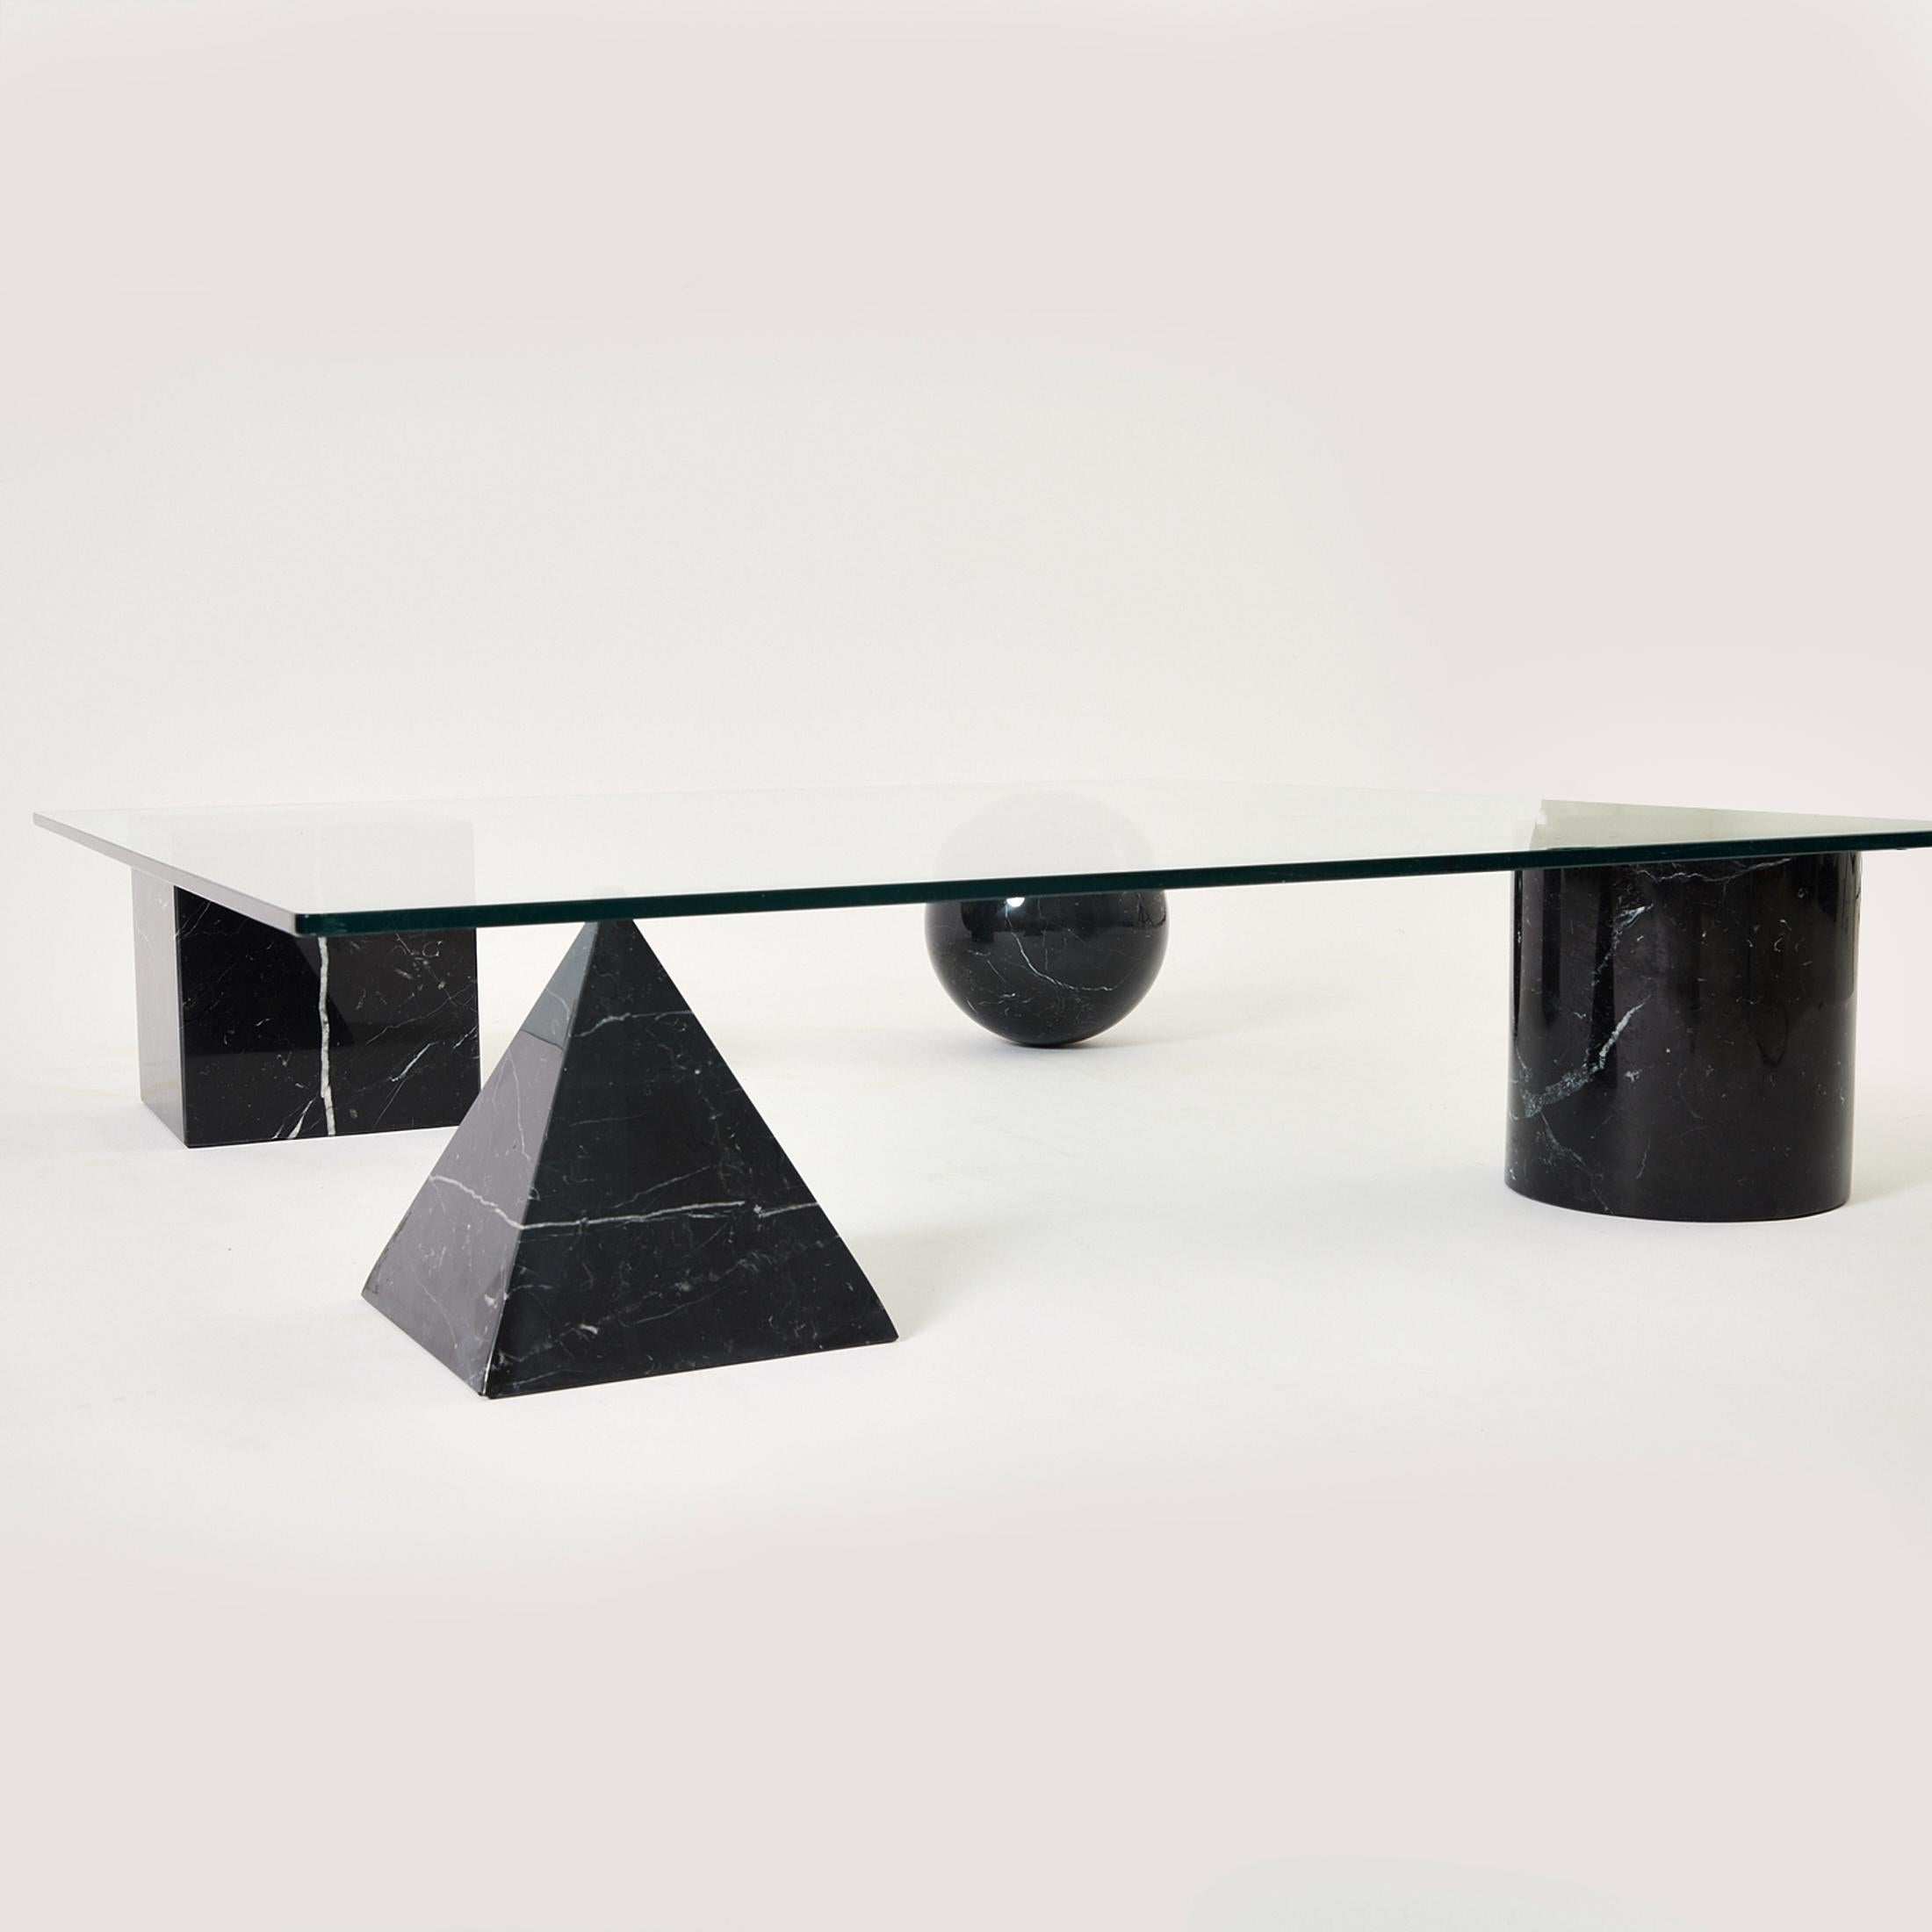 Glass Metaphora Table by Massimo and Lella Vignello, 1979